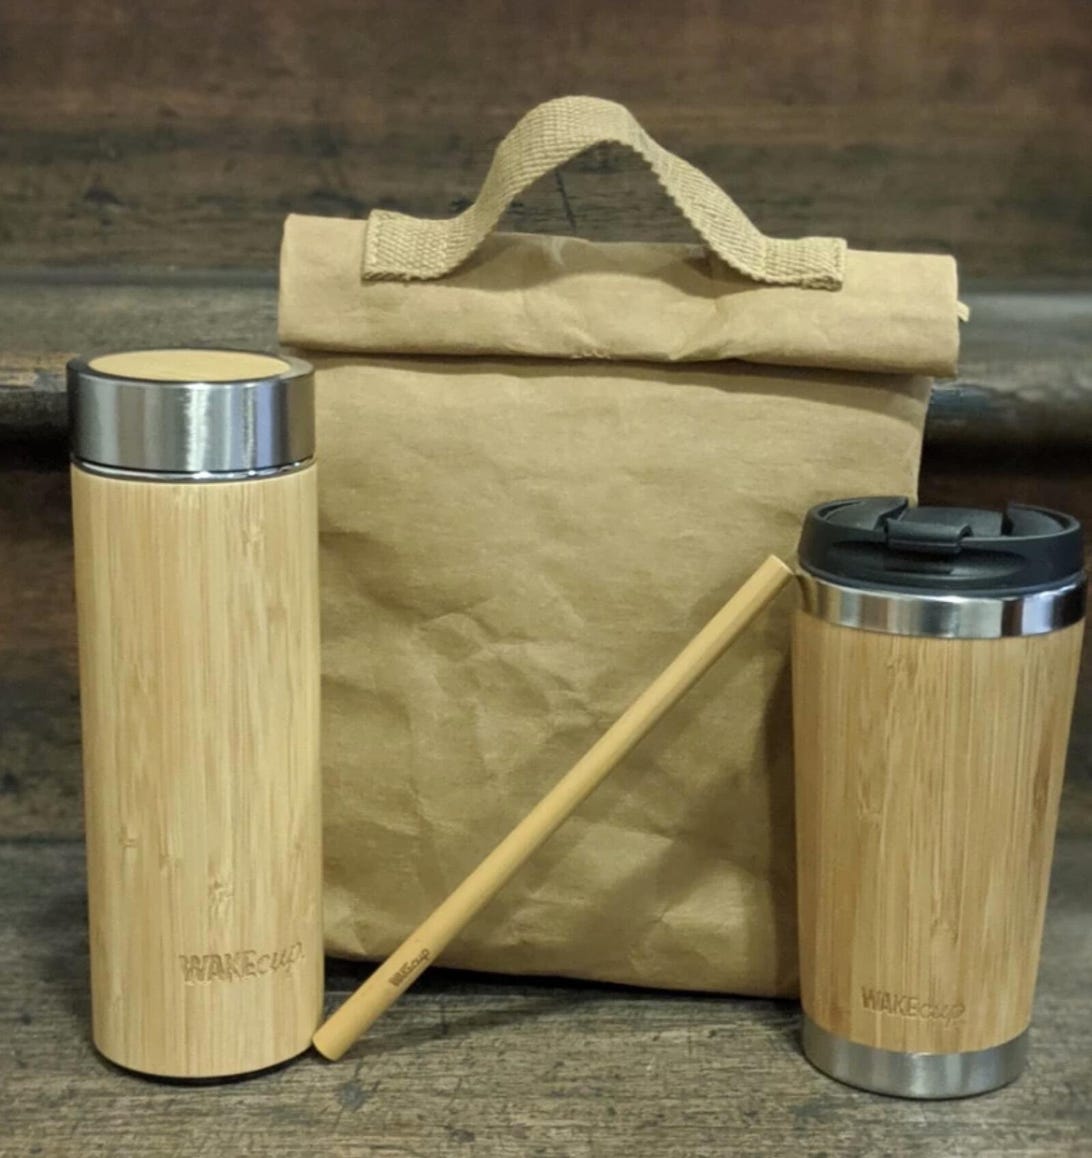 wakecup reusable travel containers